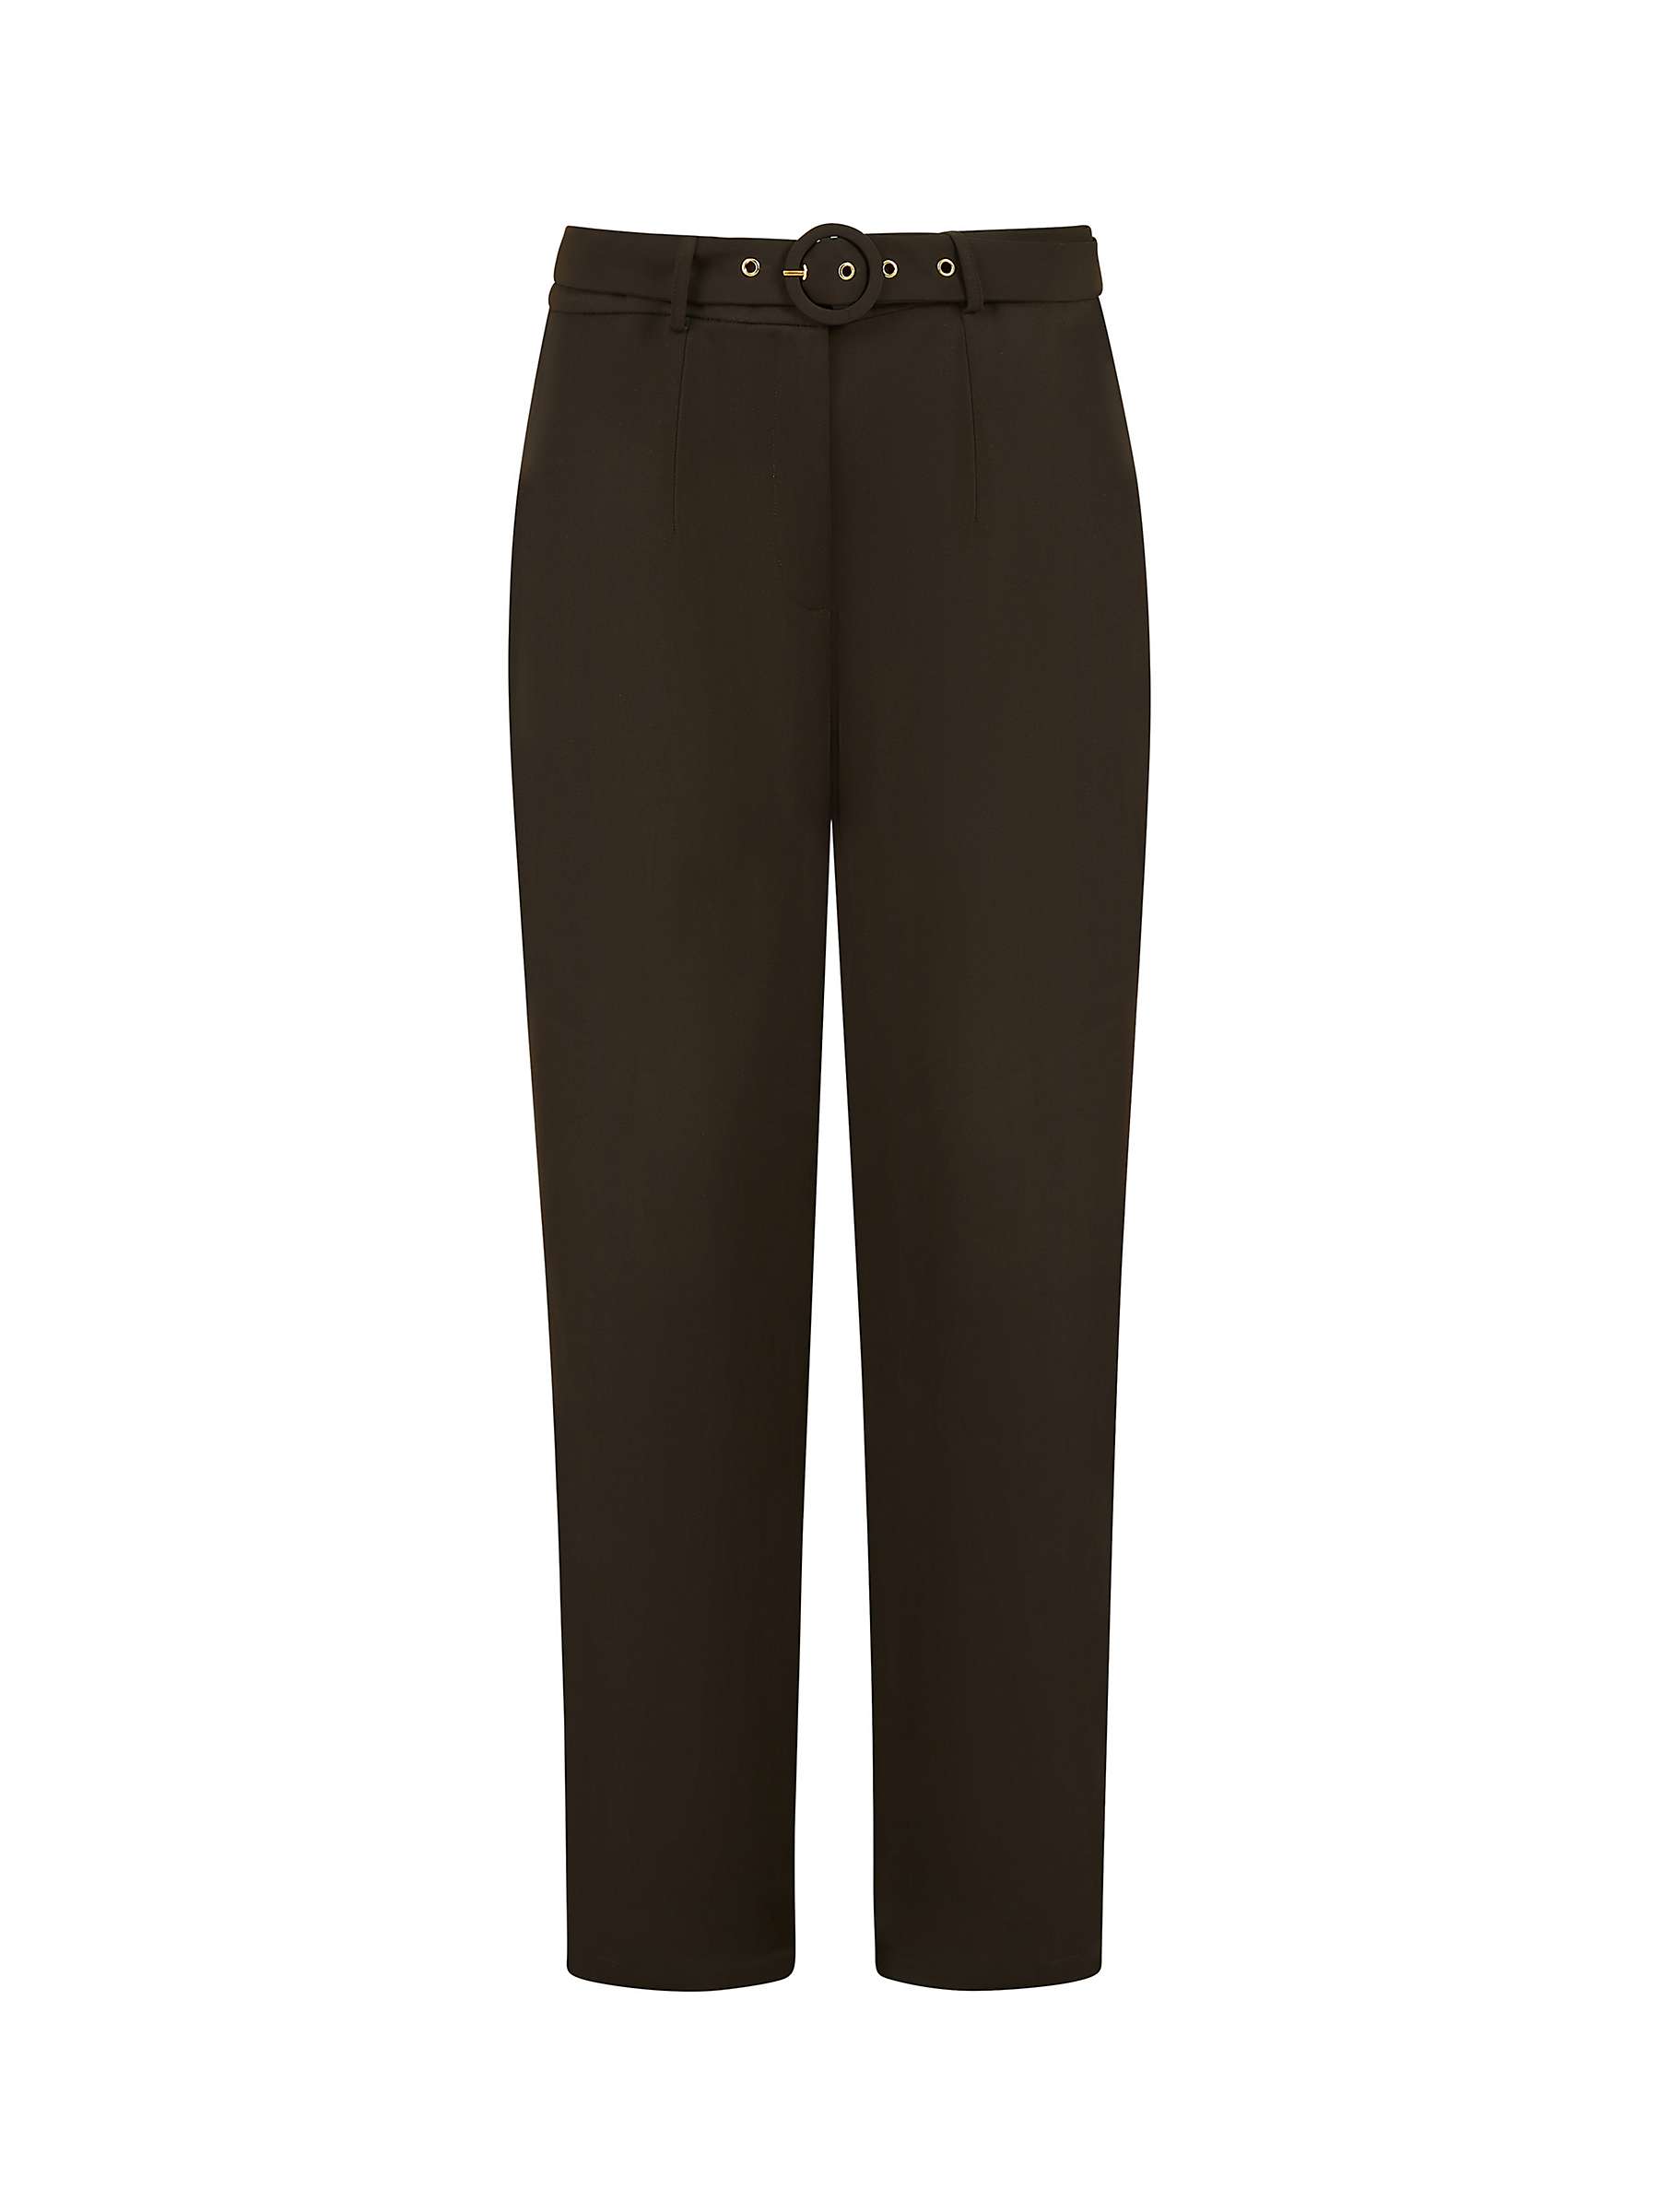 Buy Yumi Straight Leg Crepe Belted Trousers Online at johnlewis.com